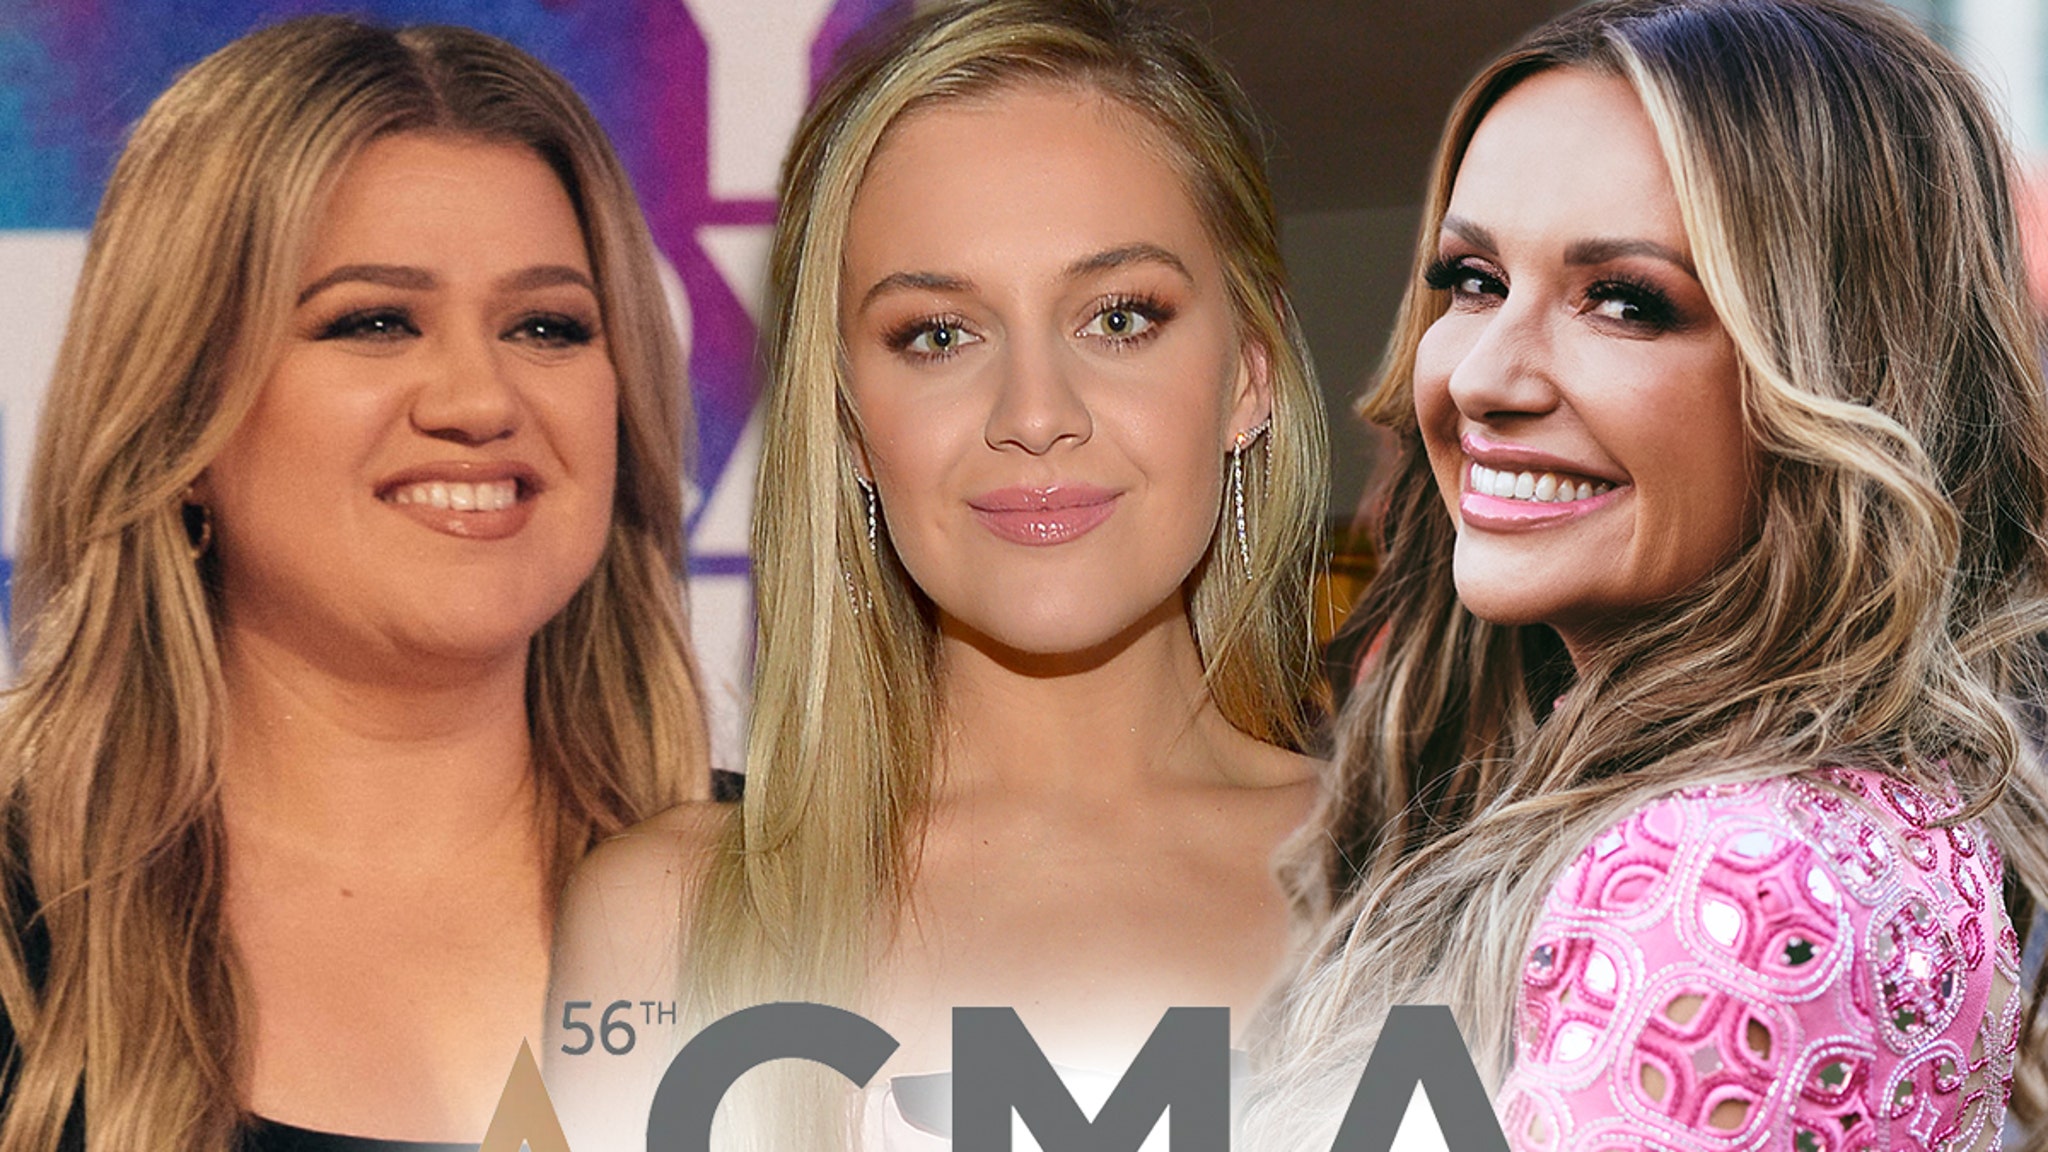 Divorcees Kelly Clarkson, Kelsea Ballerini and Carly Pearce to Unite at CMA's thumbnail